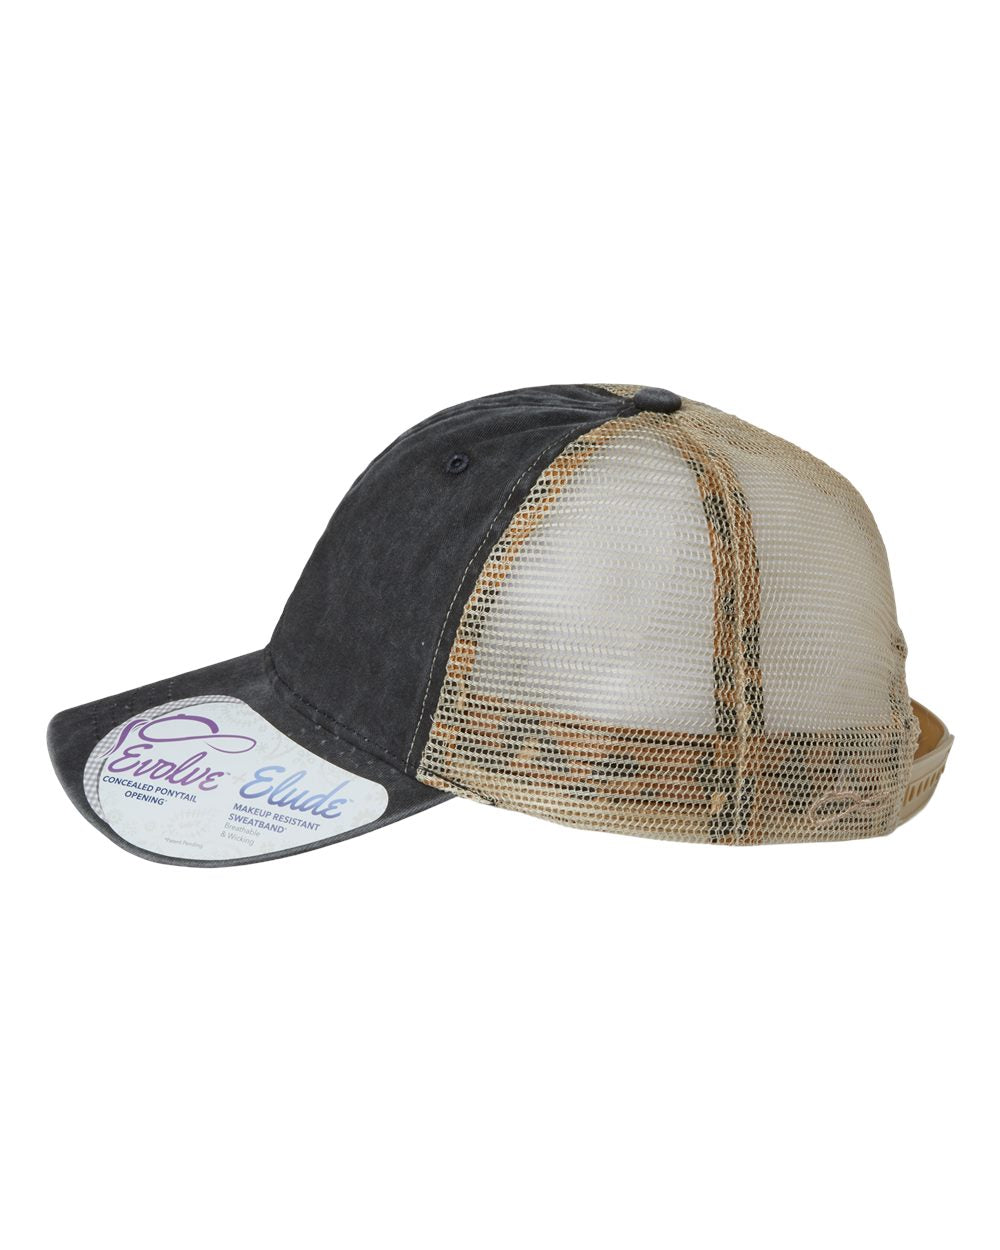 Image of Kelly's Stateline Black/Leopard Ponytail Cap with a brown patch, featuring an integrated ID slot, perfect for showcasing style and convenience at events with durable construction and a comfortable fit.